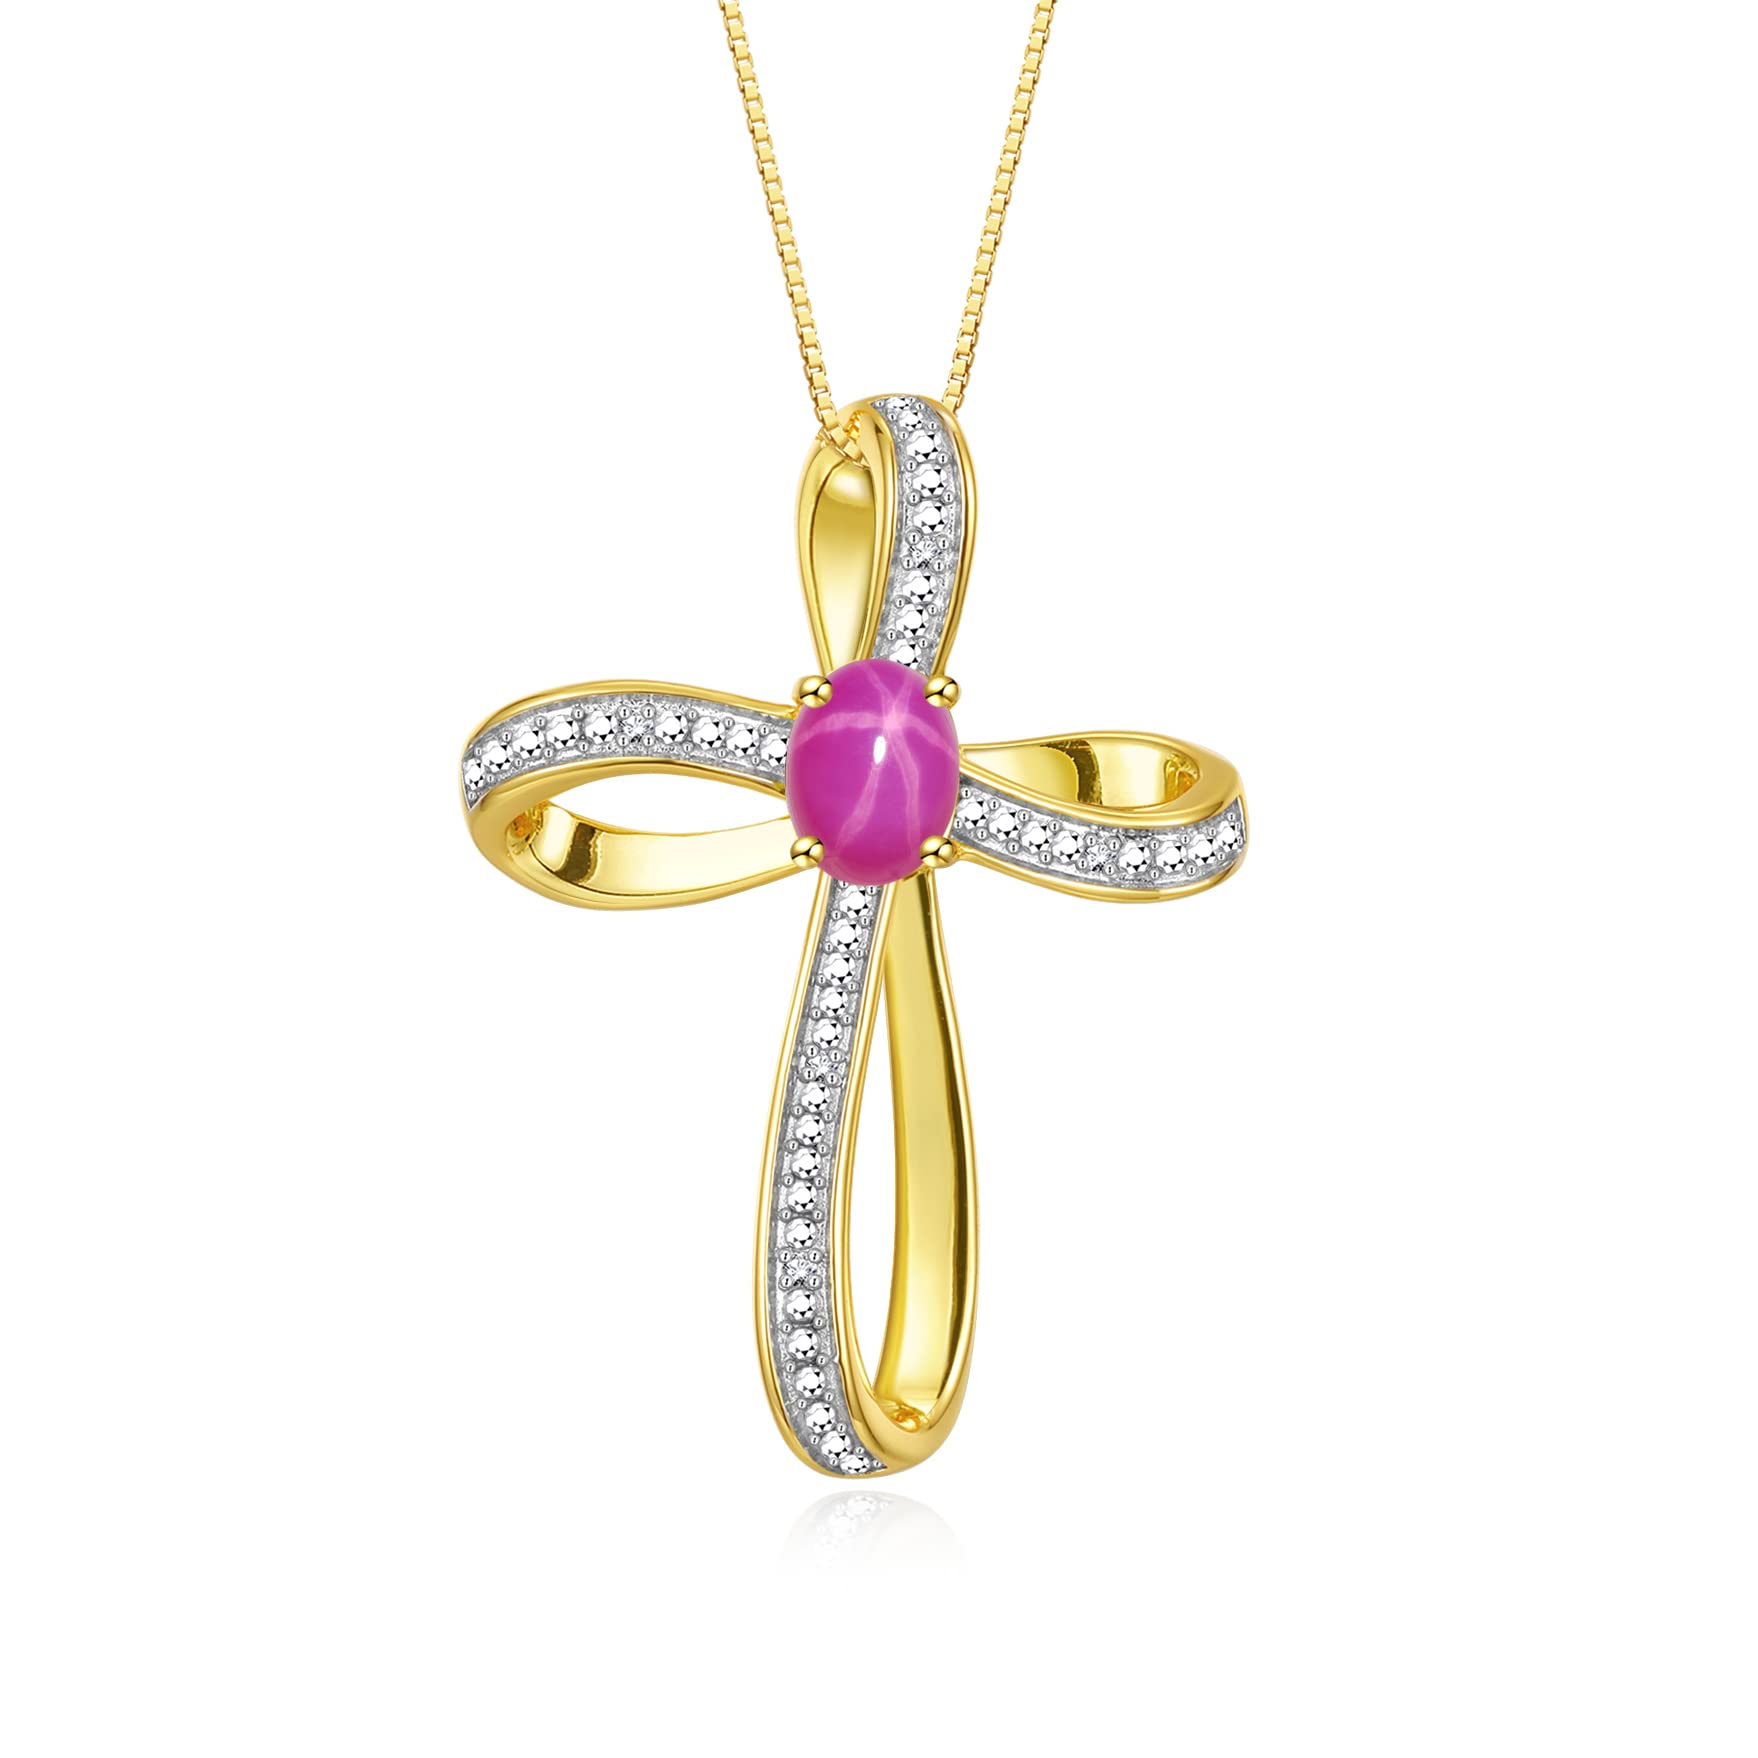 Rylos Necklaces for Women Yellow Gold Plated Silver 925 Cross Necklace Gemstone & Genuine Diamonds Pendant With 18